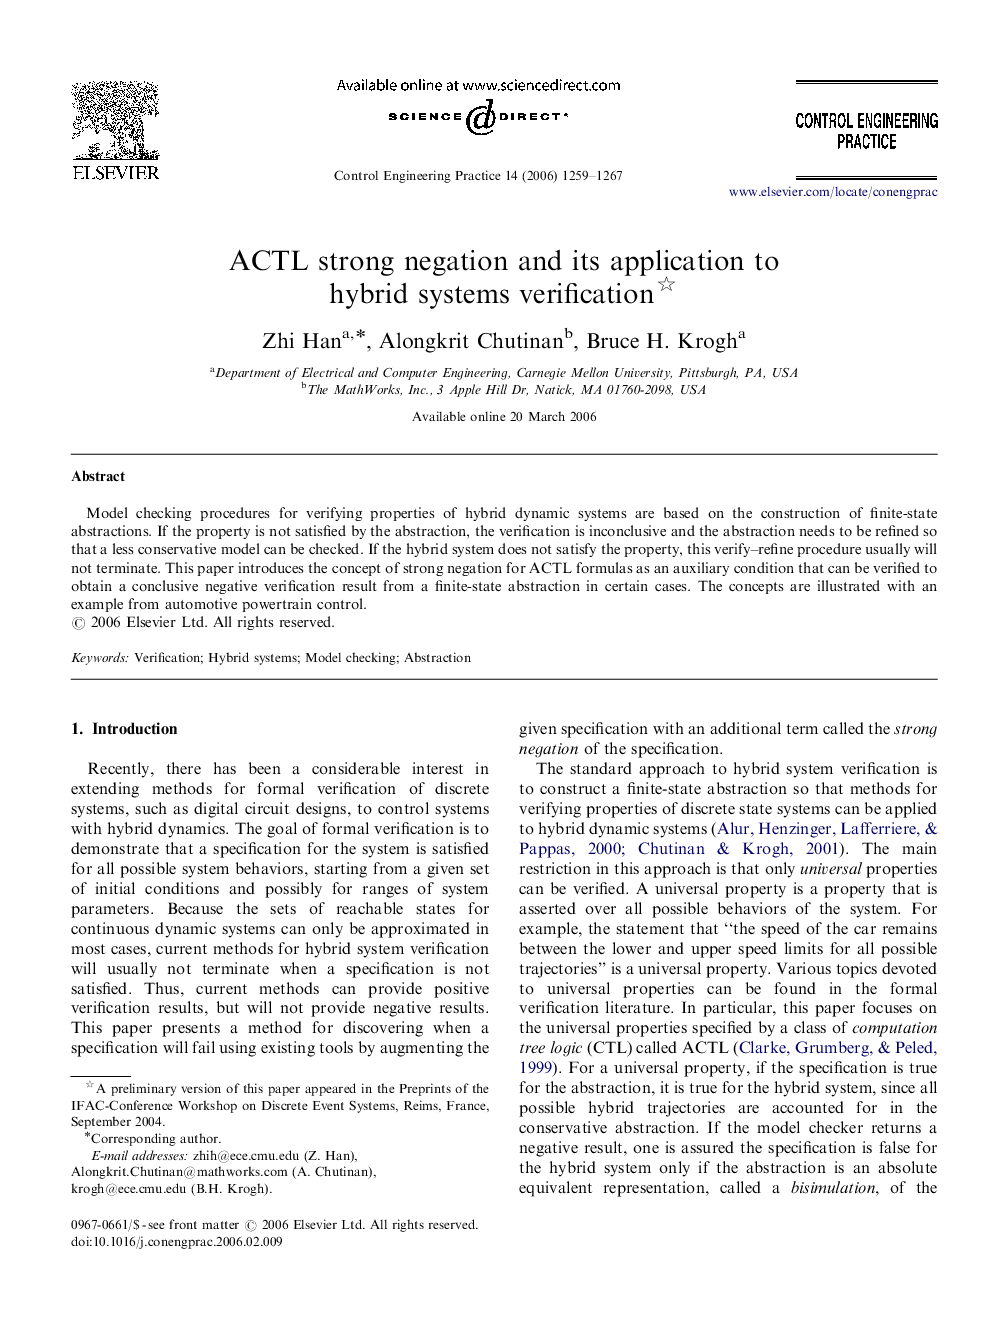 ACTL strong negation and its application to hybrid systems verification 